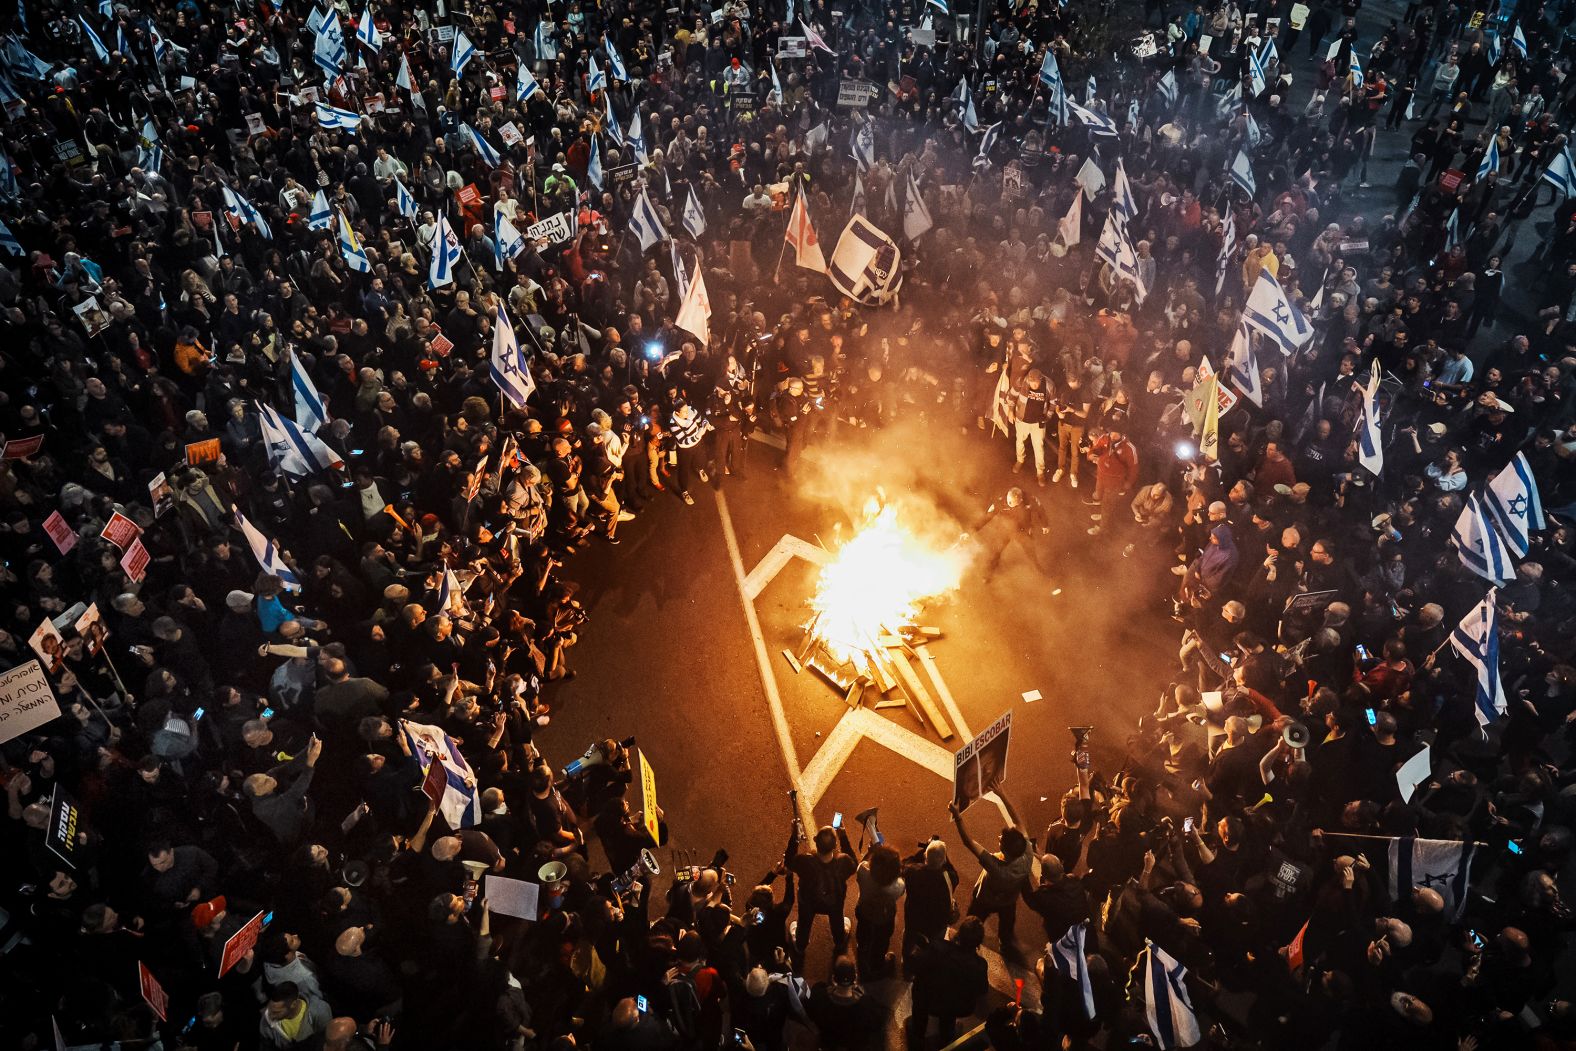 Demonstrators watch as a police officer tries to extinguish a bonfire they lit in Tel Aviv, Israel, on Saturday, March 16. <a href="https://www.cnn.com/middleeast/live-news/israel-hamas-war-gaza-news-03-16-24/h_9c8d65965f5ab67c496e5147fe534f34" target="_blank">Thousands of protesters</a> filled the streets of Tel Aviv and Jerusalem Saturday night, with two separate groups calling for the government to resign and demanding the release of hostages held in Gaza.